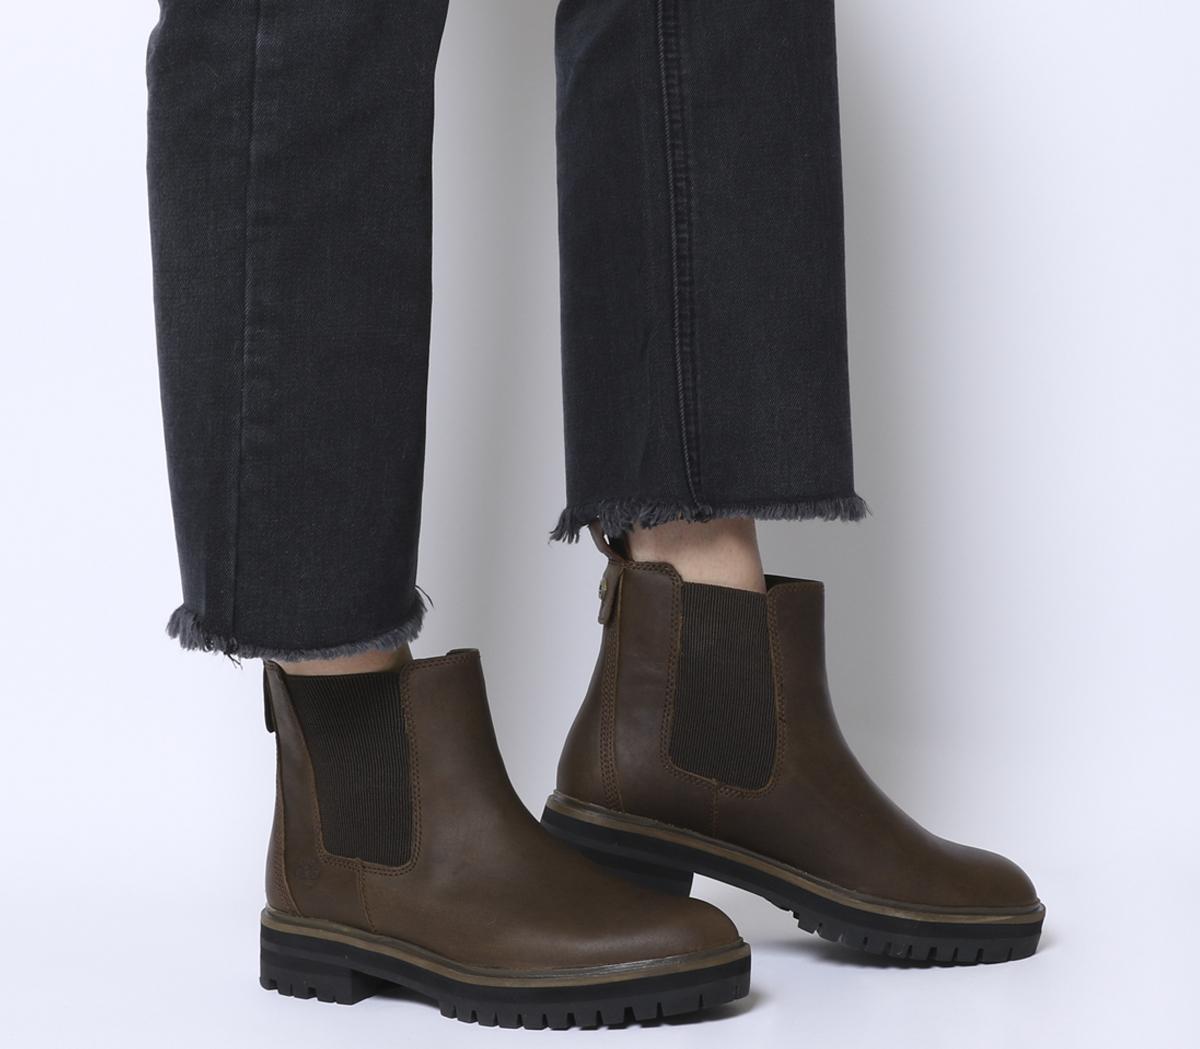 Timberland London Square Chelsea Boots 